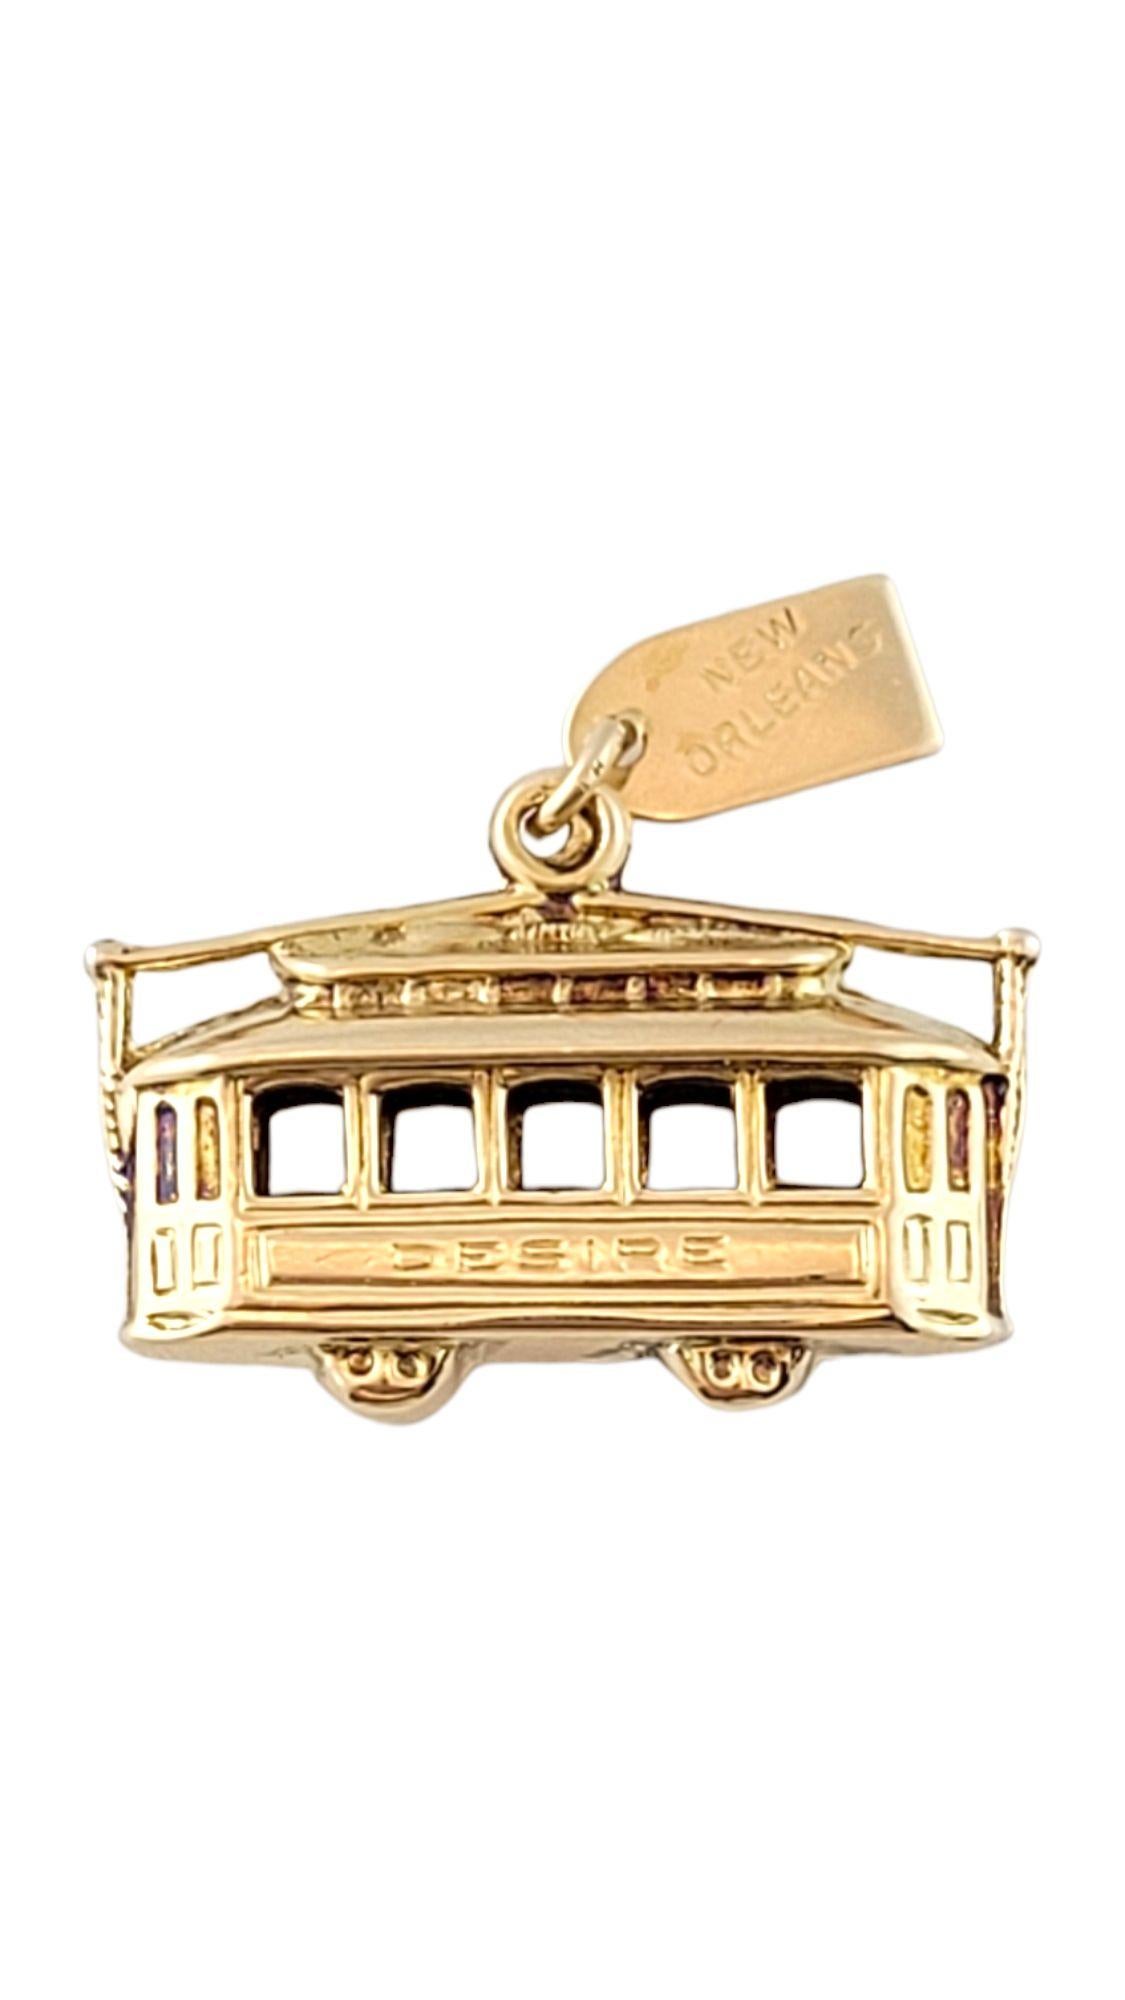 Adorable 14K yellow gold New Orleans trolley charm!

Size: 17.9mm X 25.8mm X 6.4mm

Length w/ bail: 21.1mm

Weight: 2.8 g/ 1.8 dwt

Hallmark: 14K JMF NEW ORLEANS

Very good condition, professionally polished.

Will come packaged in a gift box or